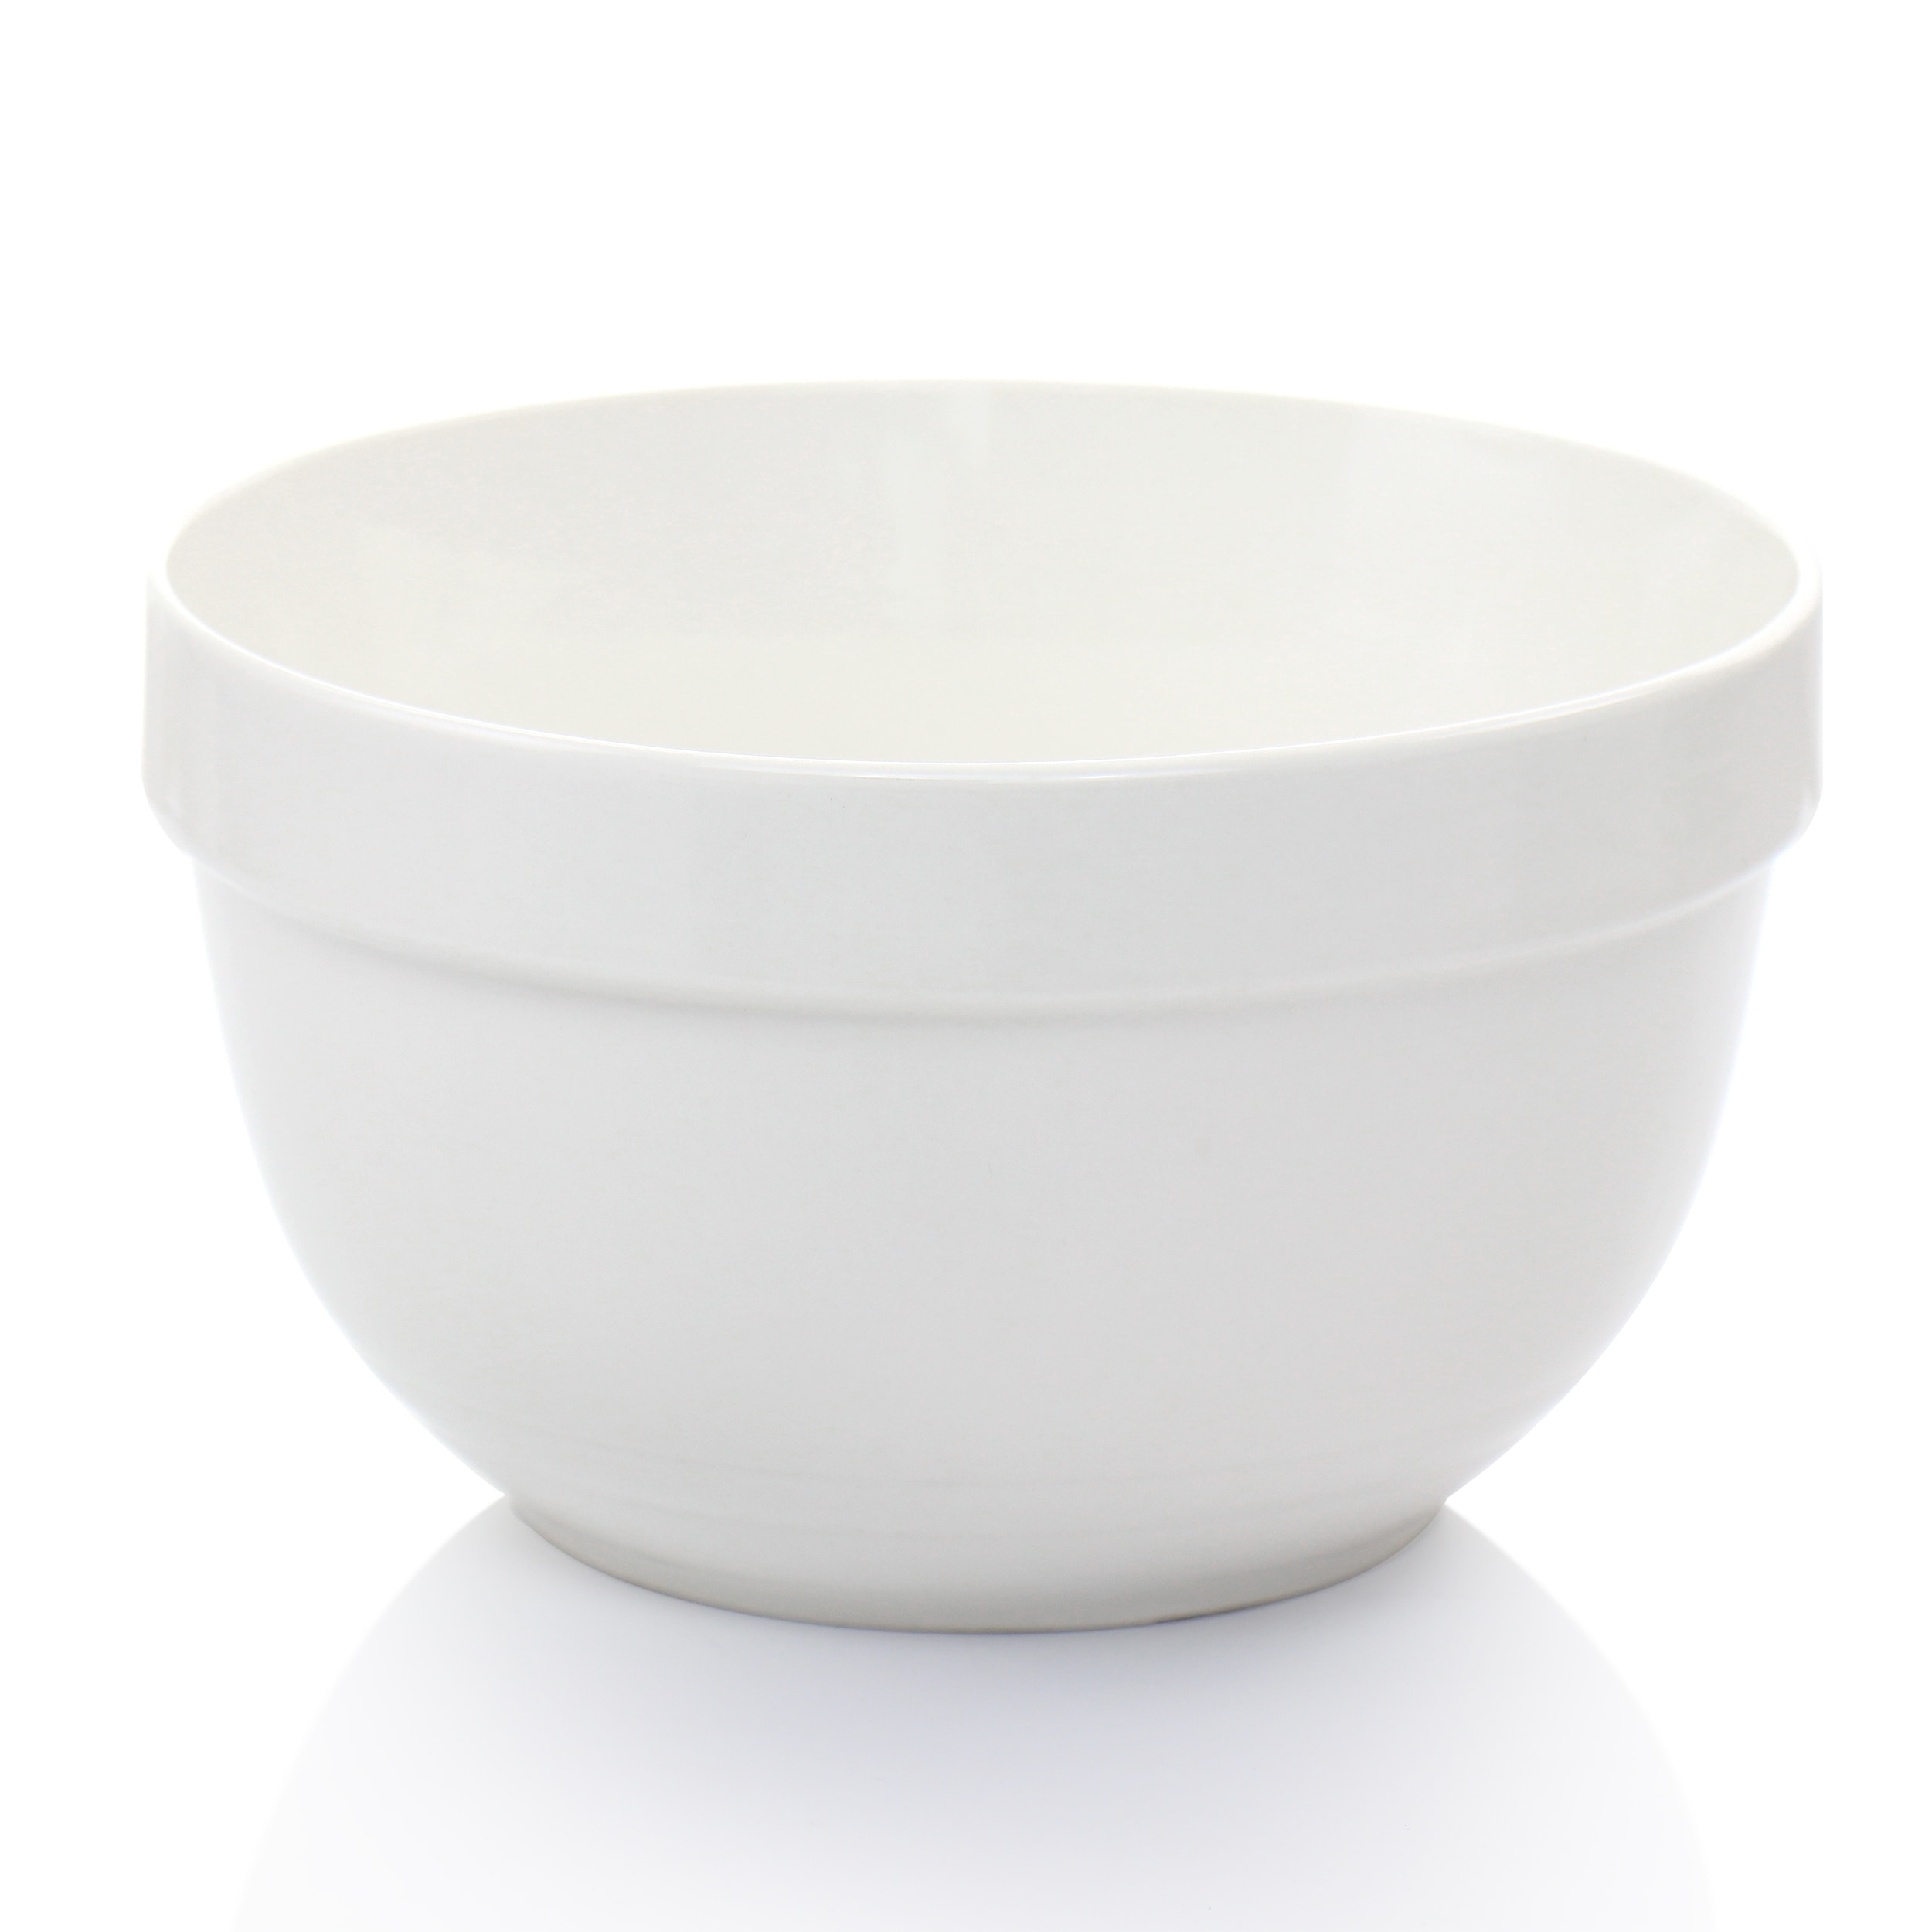 https://ak1.ostkcdn.com/images/products/is/images/direct/6277a99a202b753fe36f20d07cf6eef74c6e0c7b/3-Piece-Ceramic-Mixing-Bowl-Set.jpg